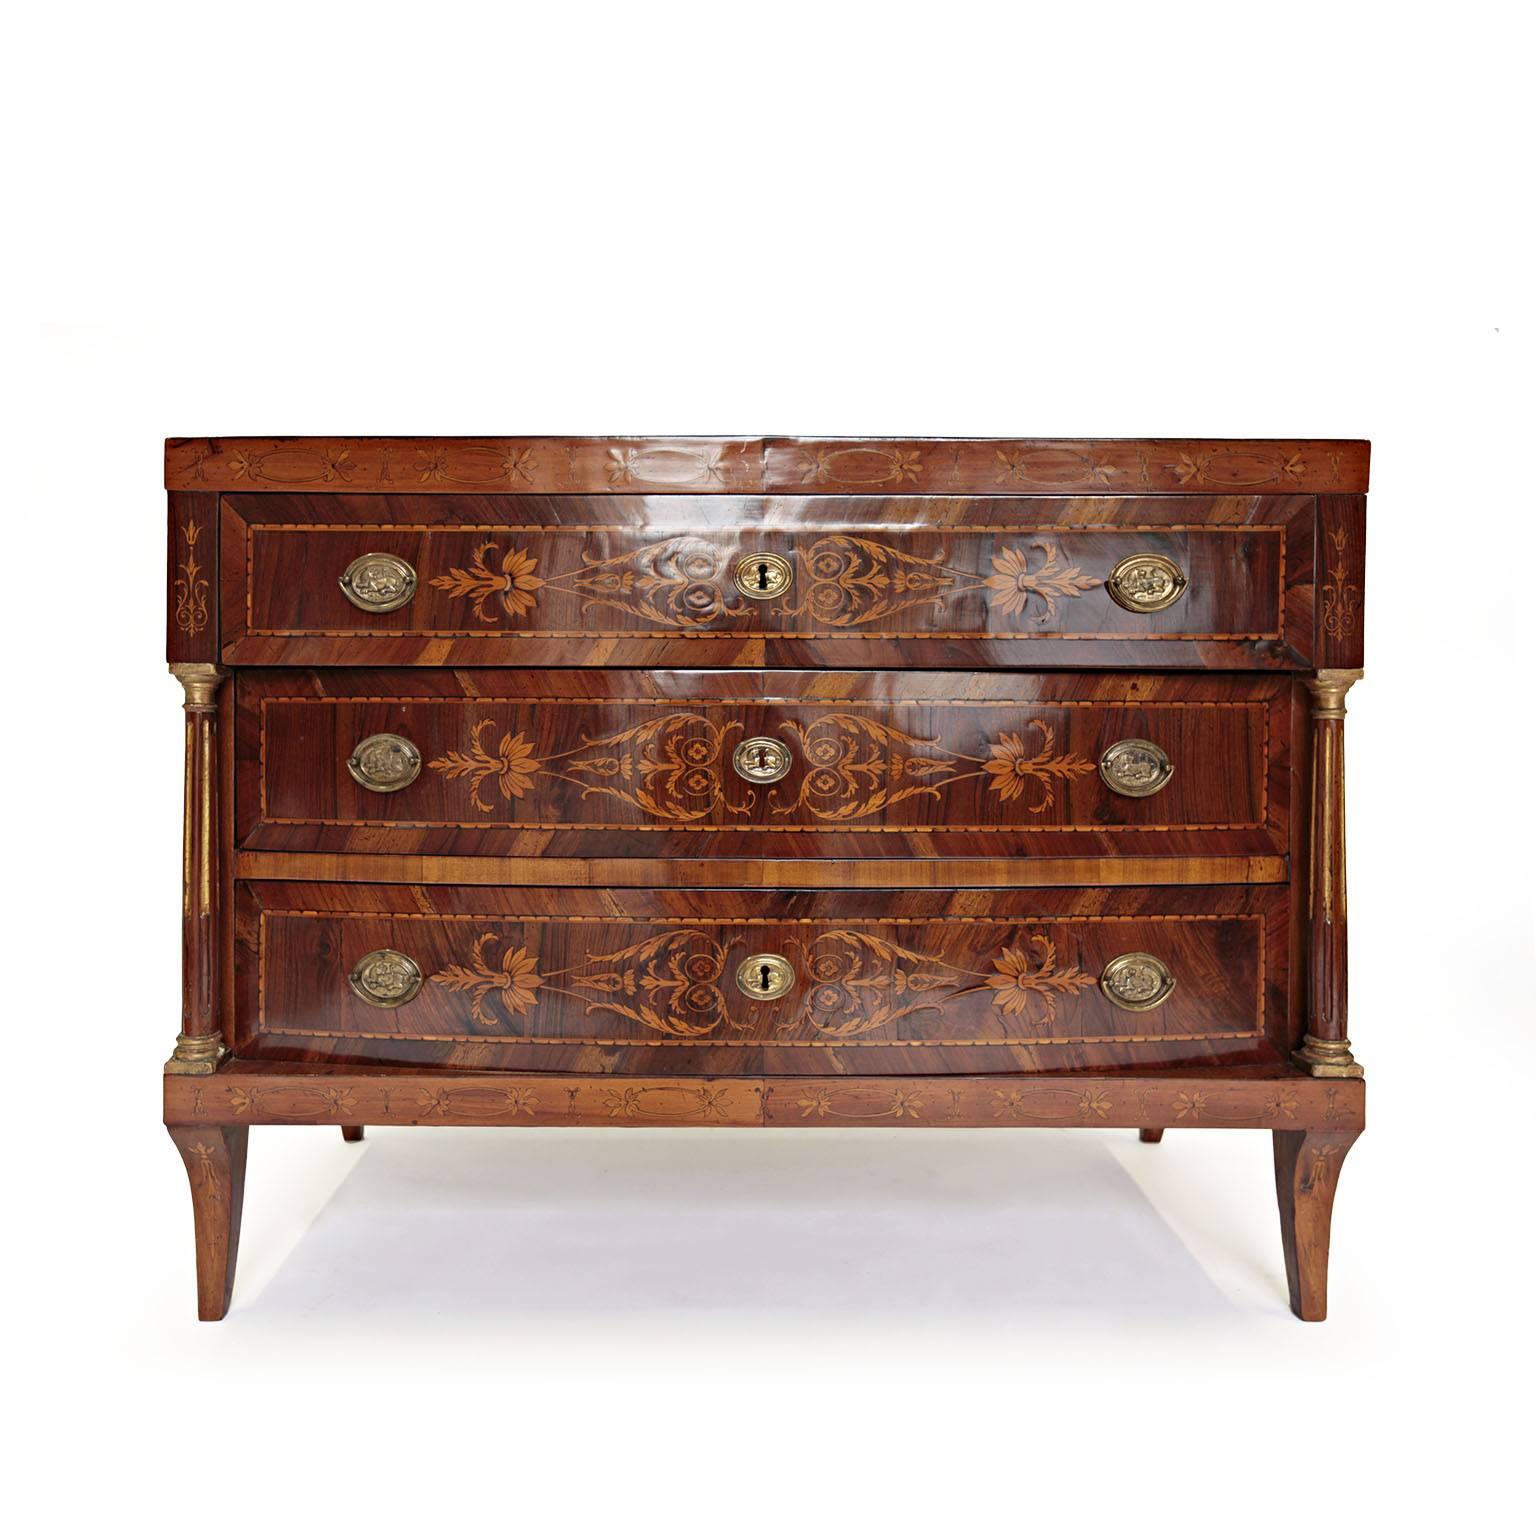 A very high quality neoclassical style, Italian, early 19th century commodes, in the manner of Maggiolini. 
Highly detailed marquetry in tulipwood, kingwood and rosewood. The commode has three drawers bronze mounted. All the three drawers have a